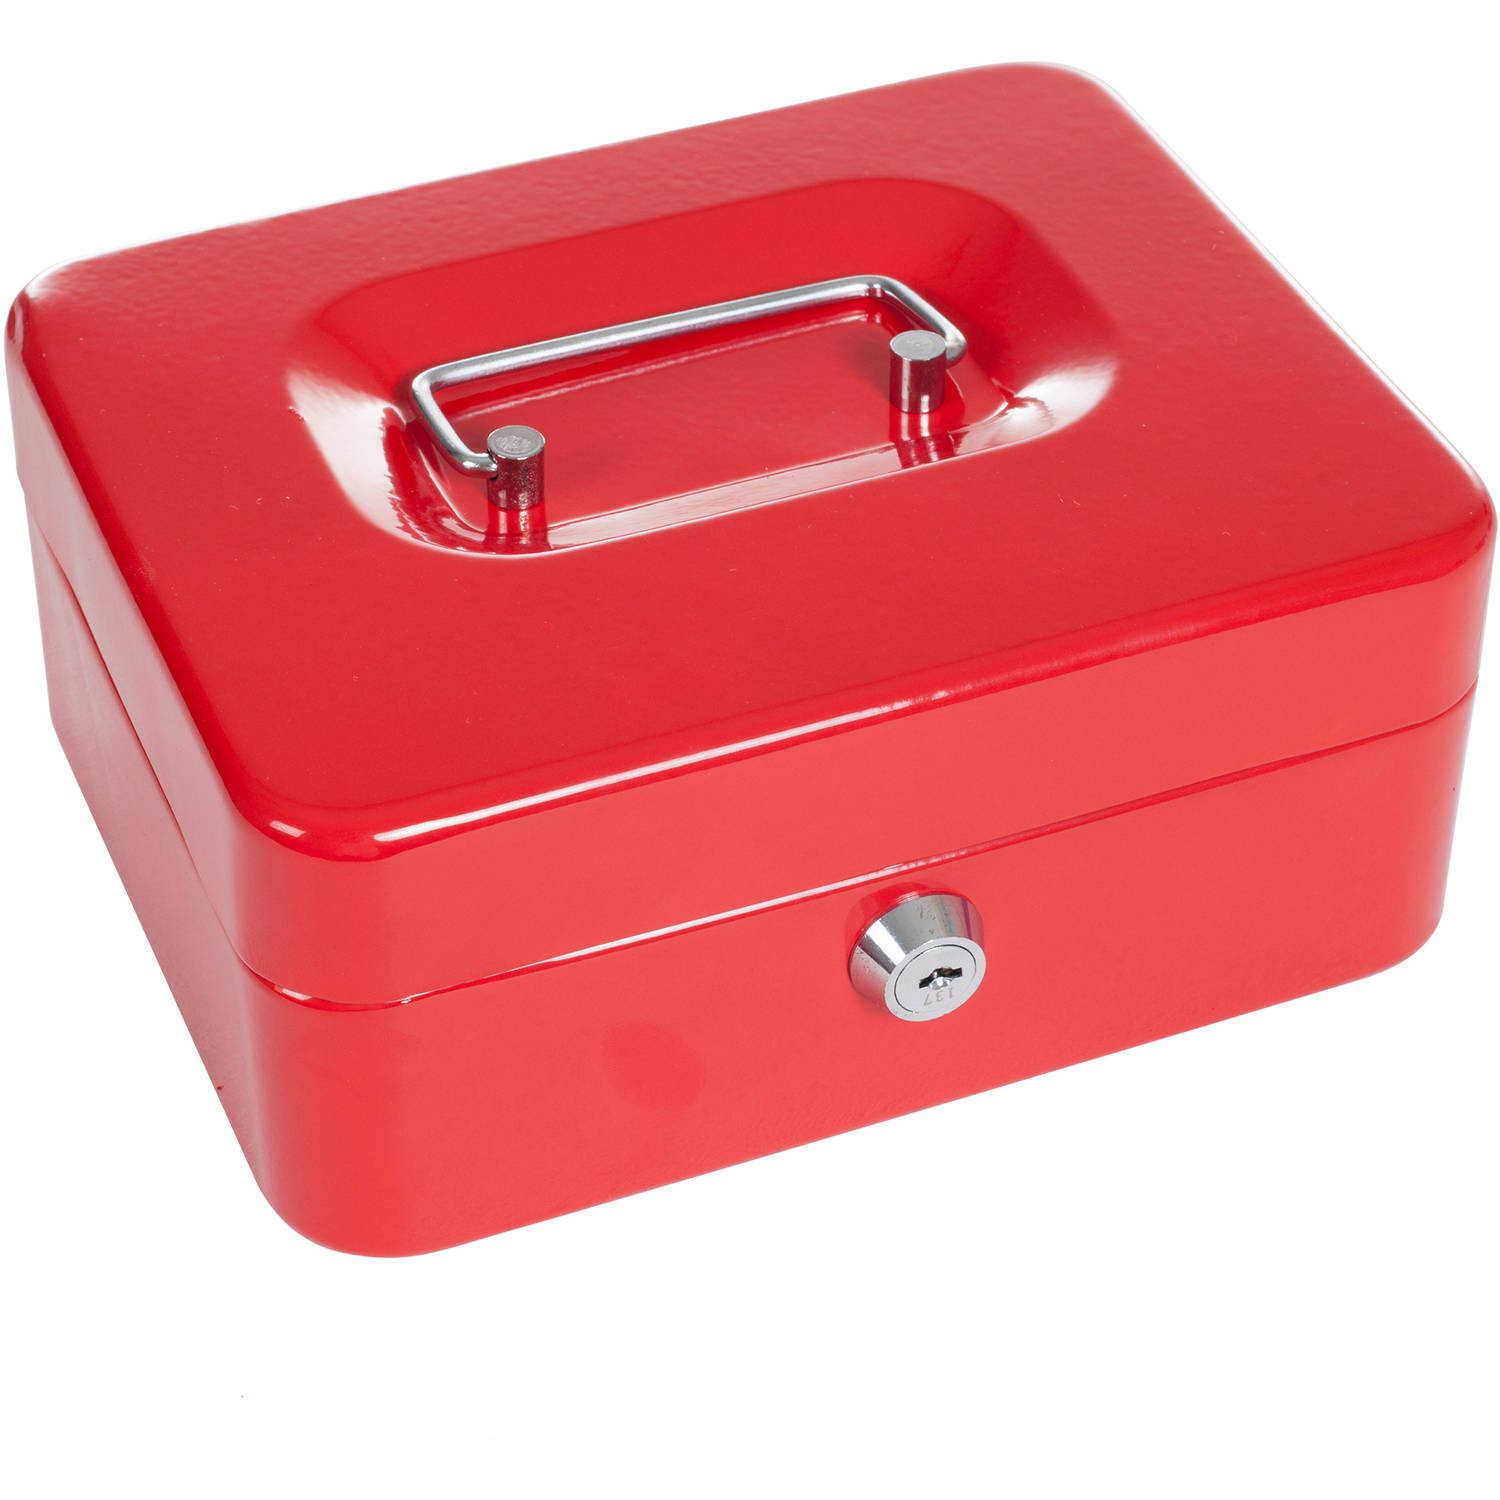 Stalwart 8' Key Lock Cash Box with Coin Tray, Red